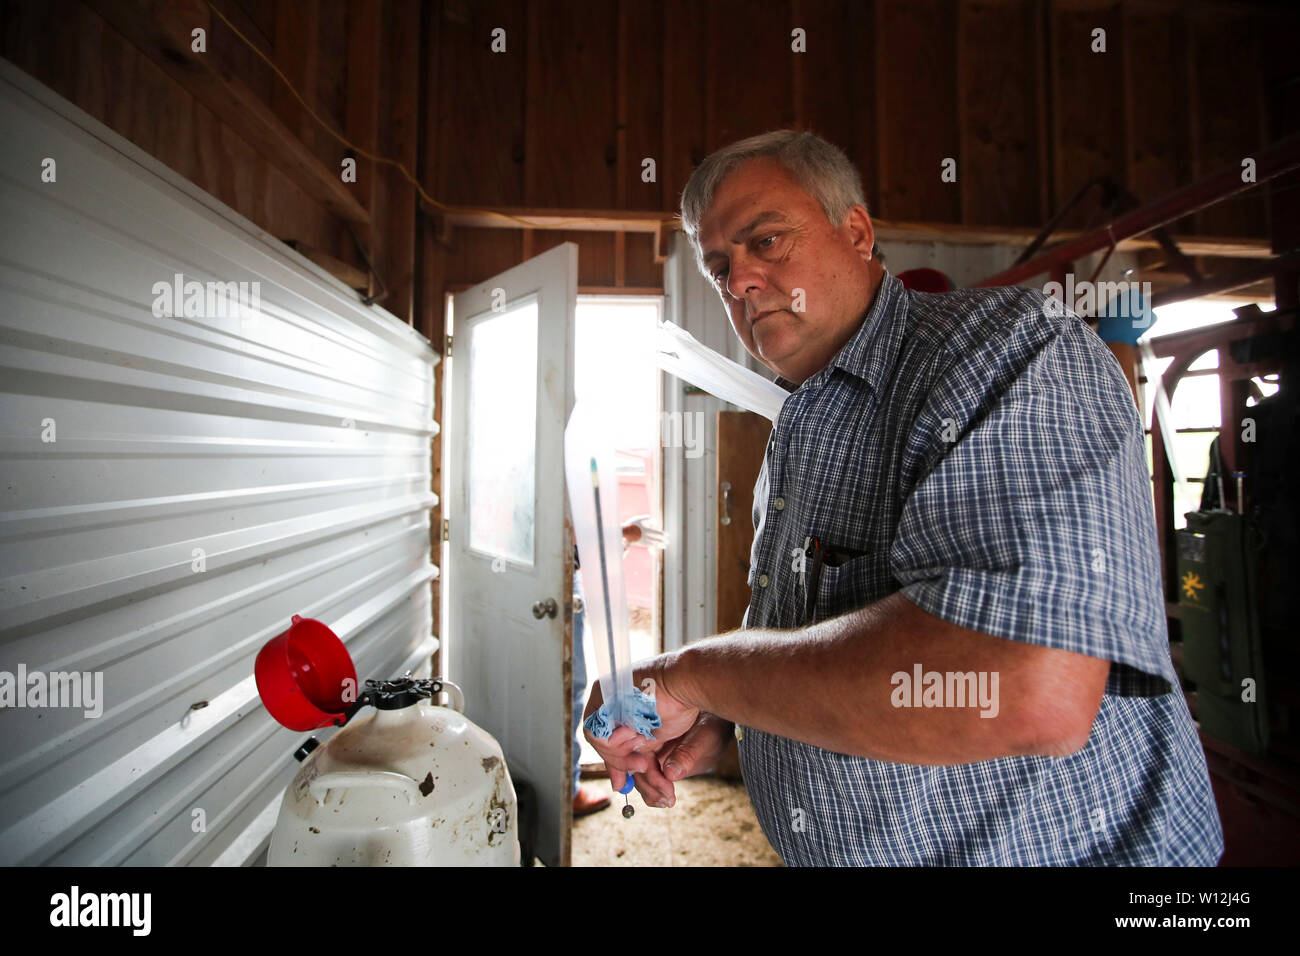 Atlantic, USA. 29th June, 2019. Bill Pellett's long-time business partner Phil Ham prepares a syringe for his son Cody Ham during artificial insemination procedures on Bill Pellett's farm in Atlantic, Iowa, the United States, on June 20, 2019. Bill Pellett, a fifth-generation farmer in Atlantic, a small city in the U.S. Midwestern state of Iowa, has found a cost-effective way to raise better calves each year without purchasing new bulls -- artificial insemination (AI). Credit: Wang Ying/Xinhua/Alamy Live News Stock Photo